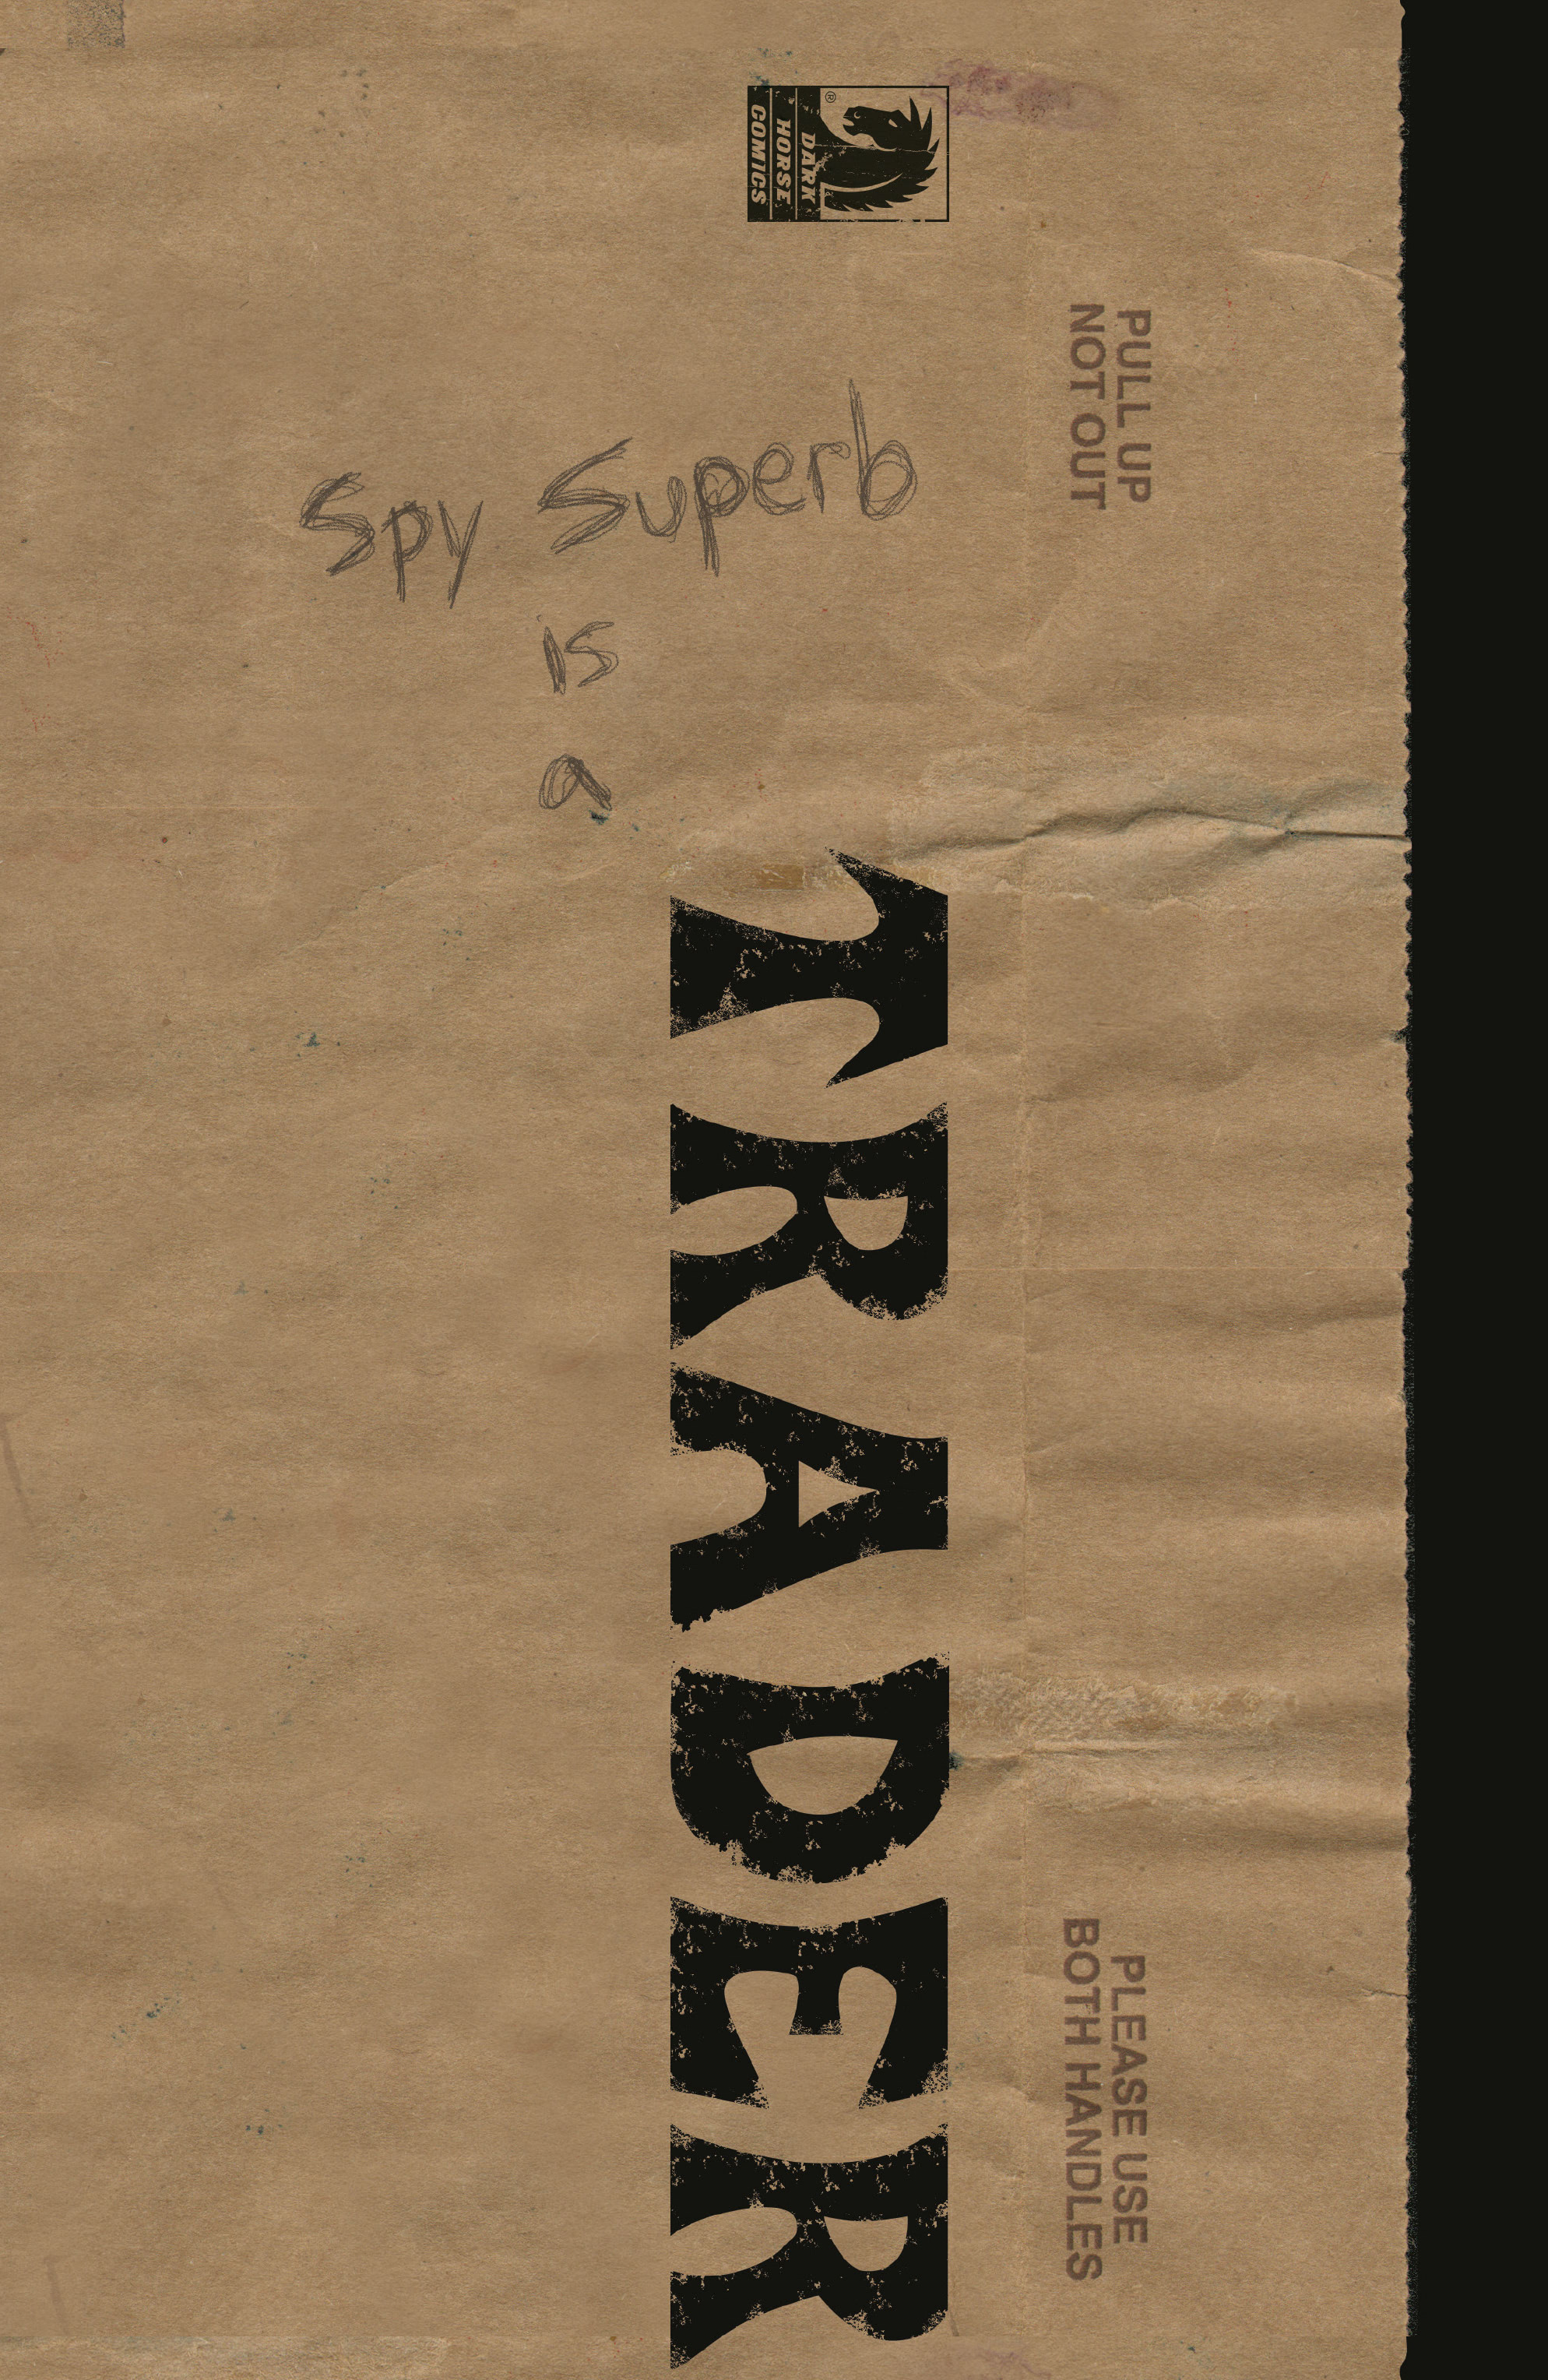 Read online Spy Superb comic -  Issue #1 - 1